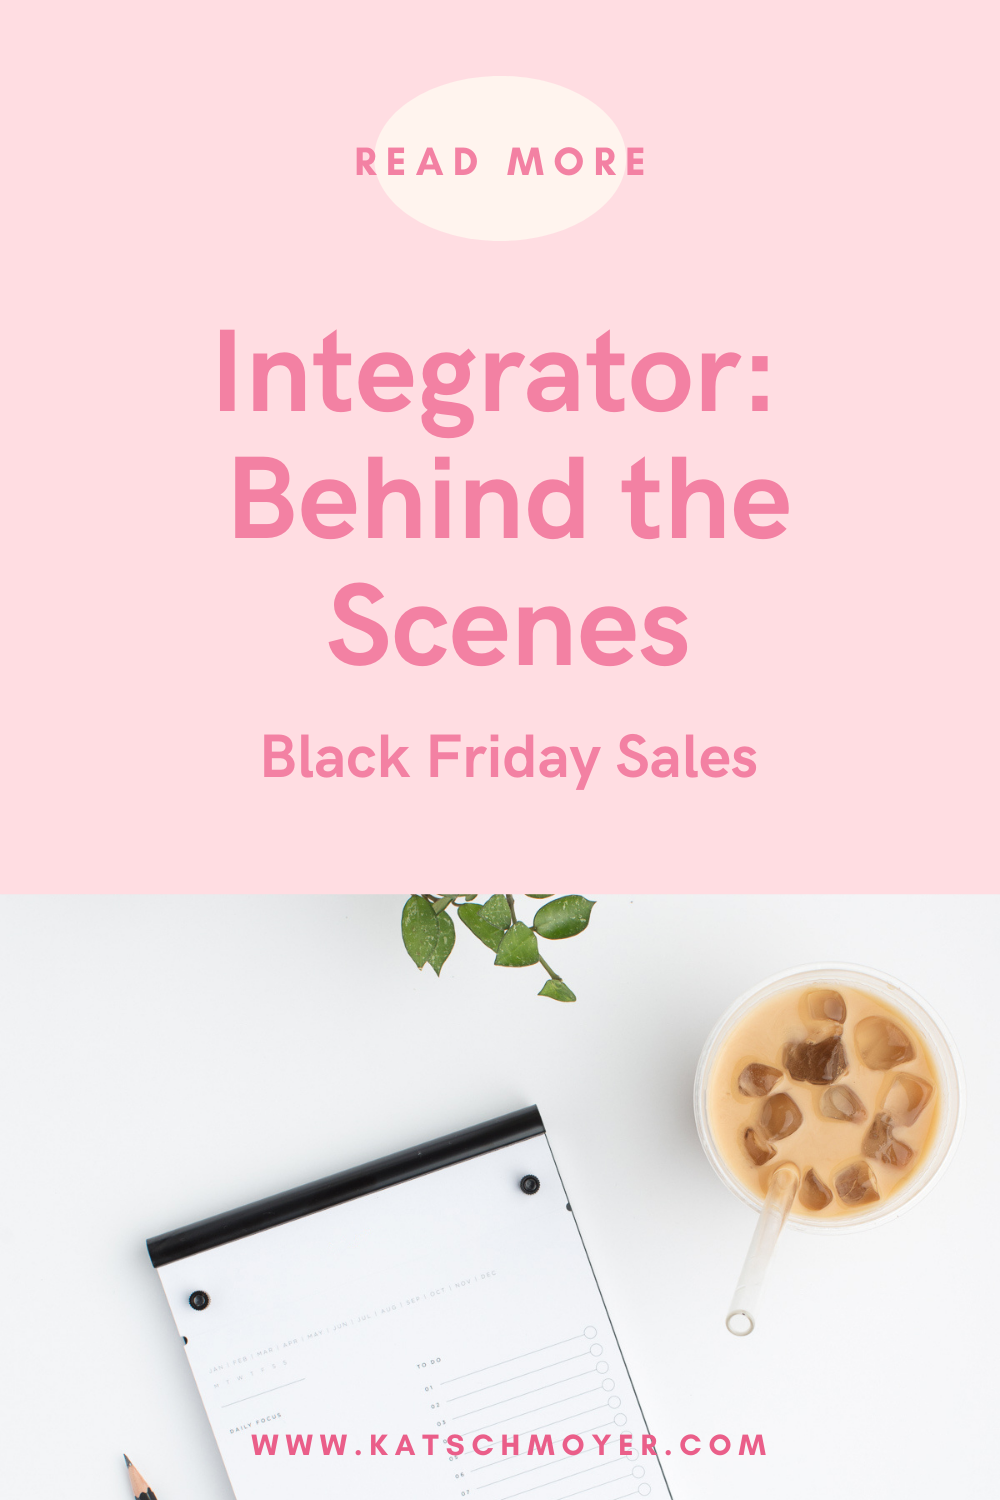 Integrator Behind the Scenes: Black Friday Sales - Integrator Kat Schmoyer shares about what her agency can do for small business owners running big sales in their businesses